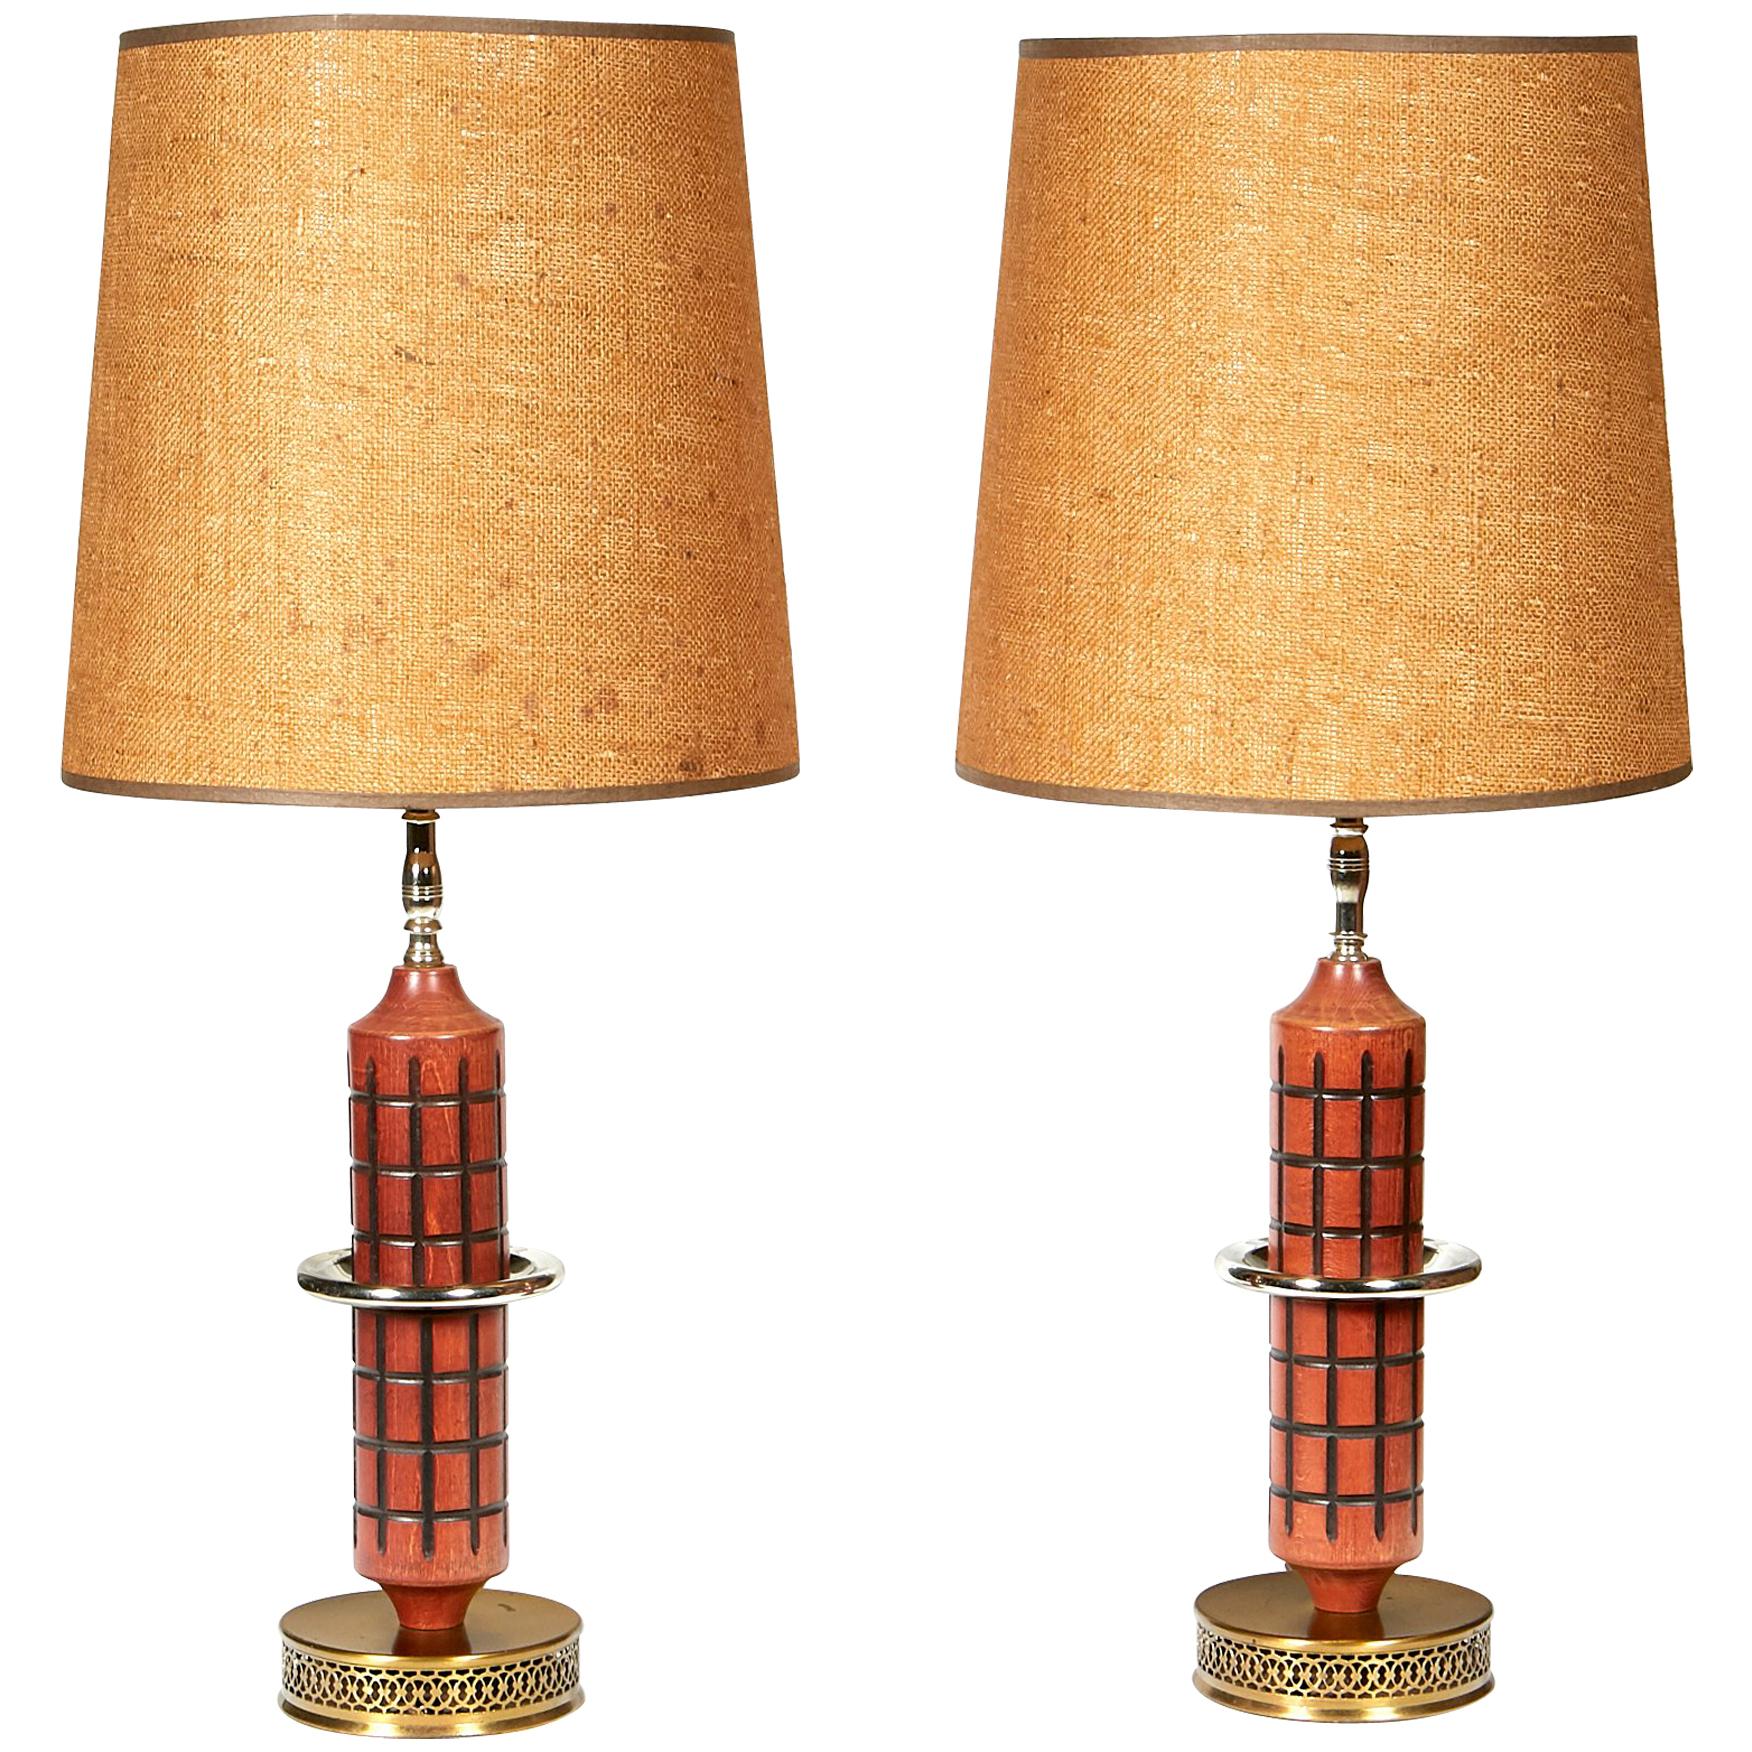 1960s Wood & Burlap Shade Table Lamps, Pair For Sale